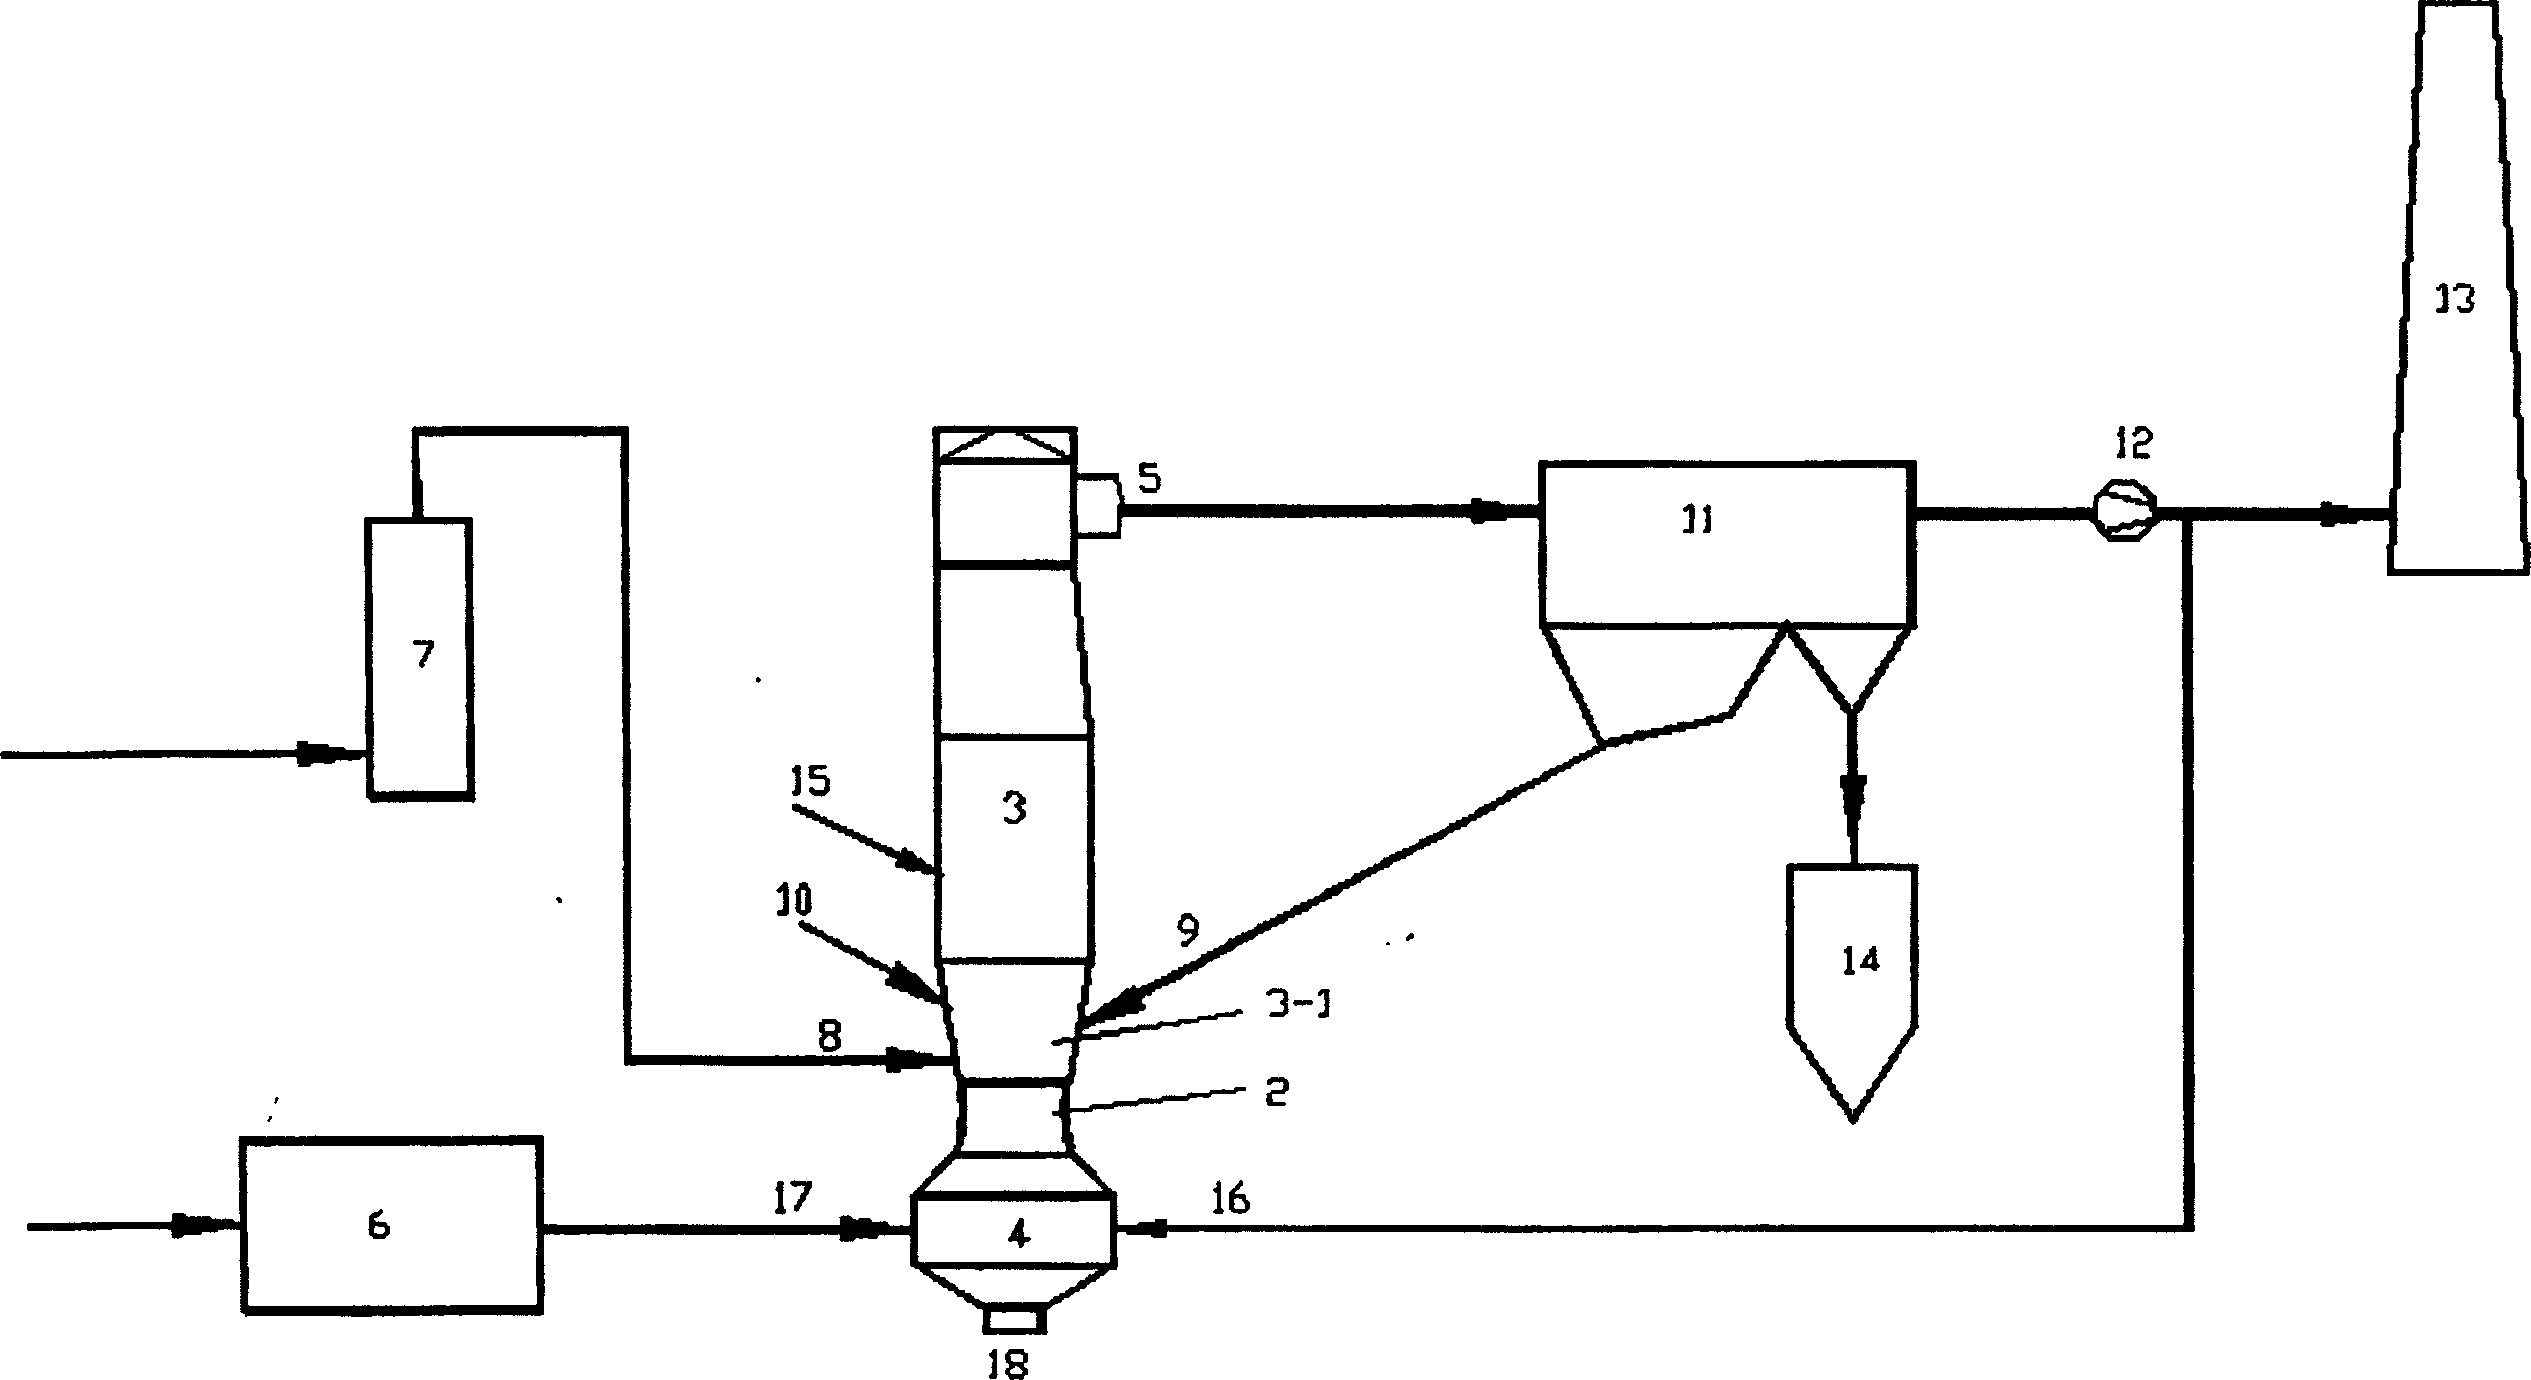 Dry flue gas desulfurizing process with independent feeding, back-returning and water-spraying devices